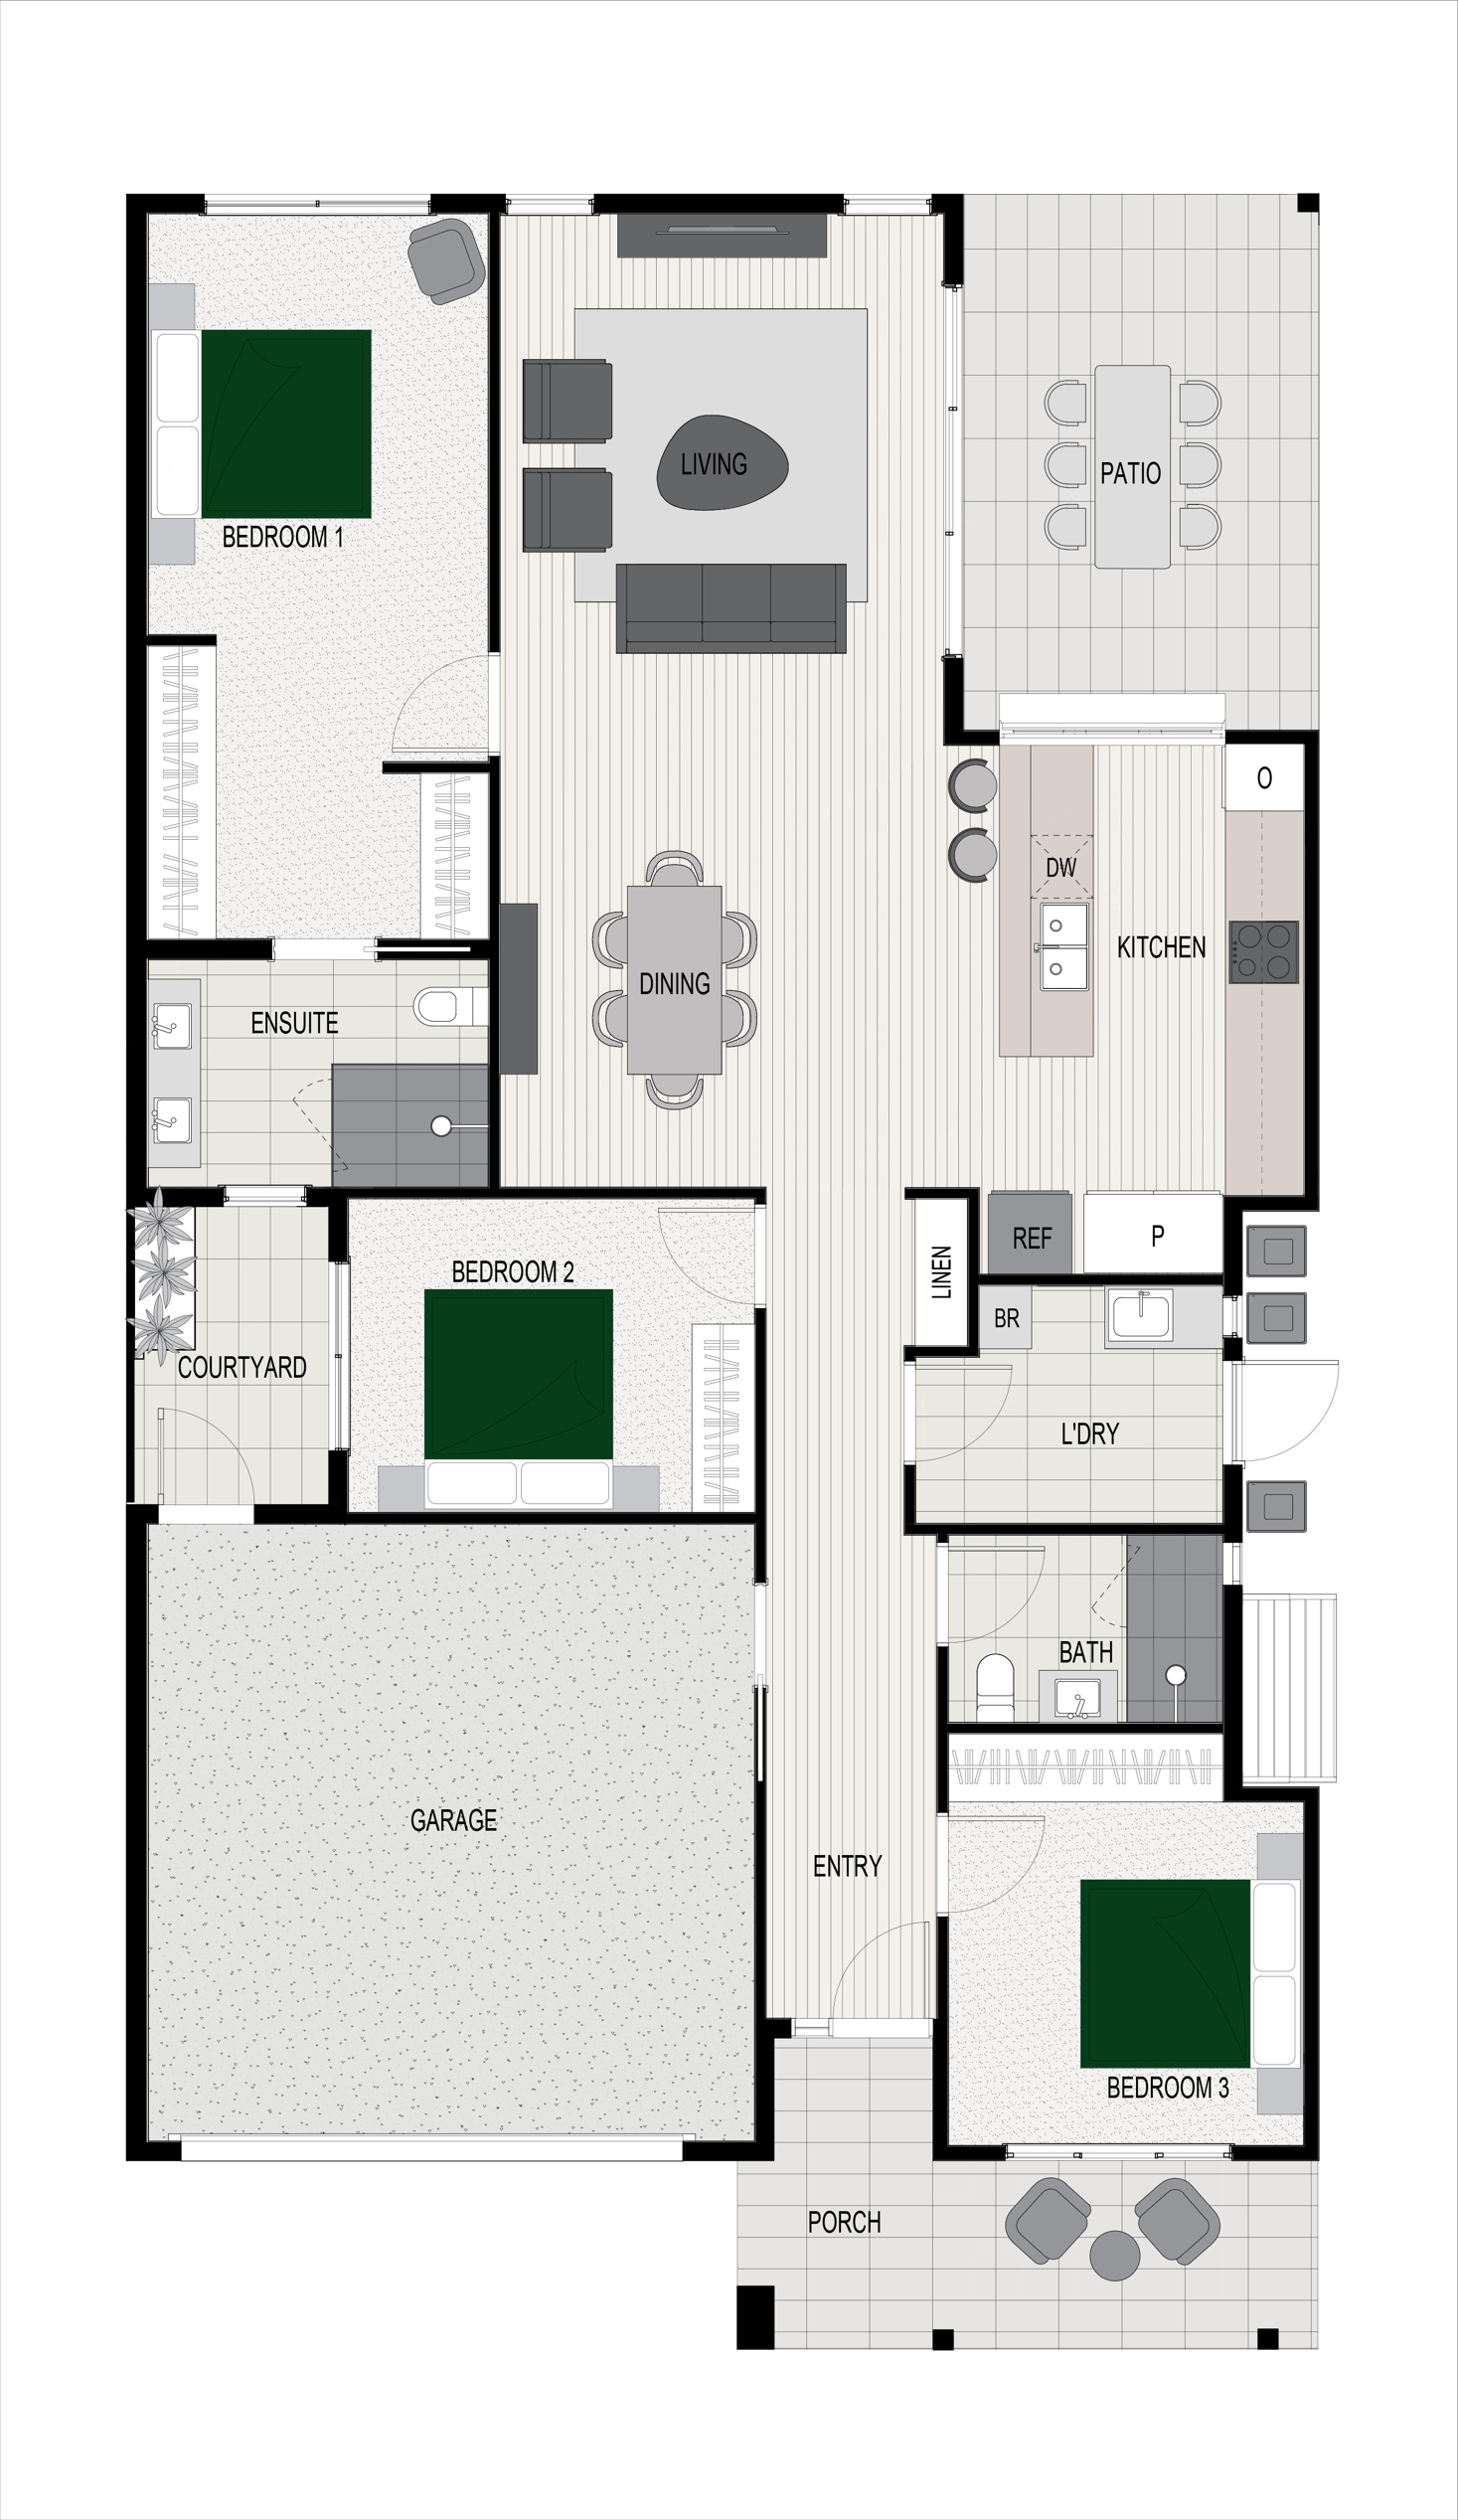 Floor plan of the Daintree H2 house design, located at Stockland Halcyon Gables in The Hills district. 